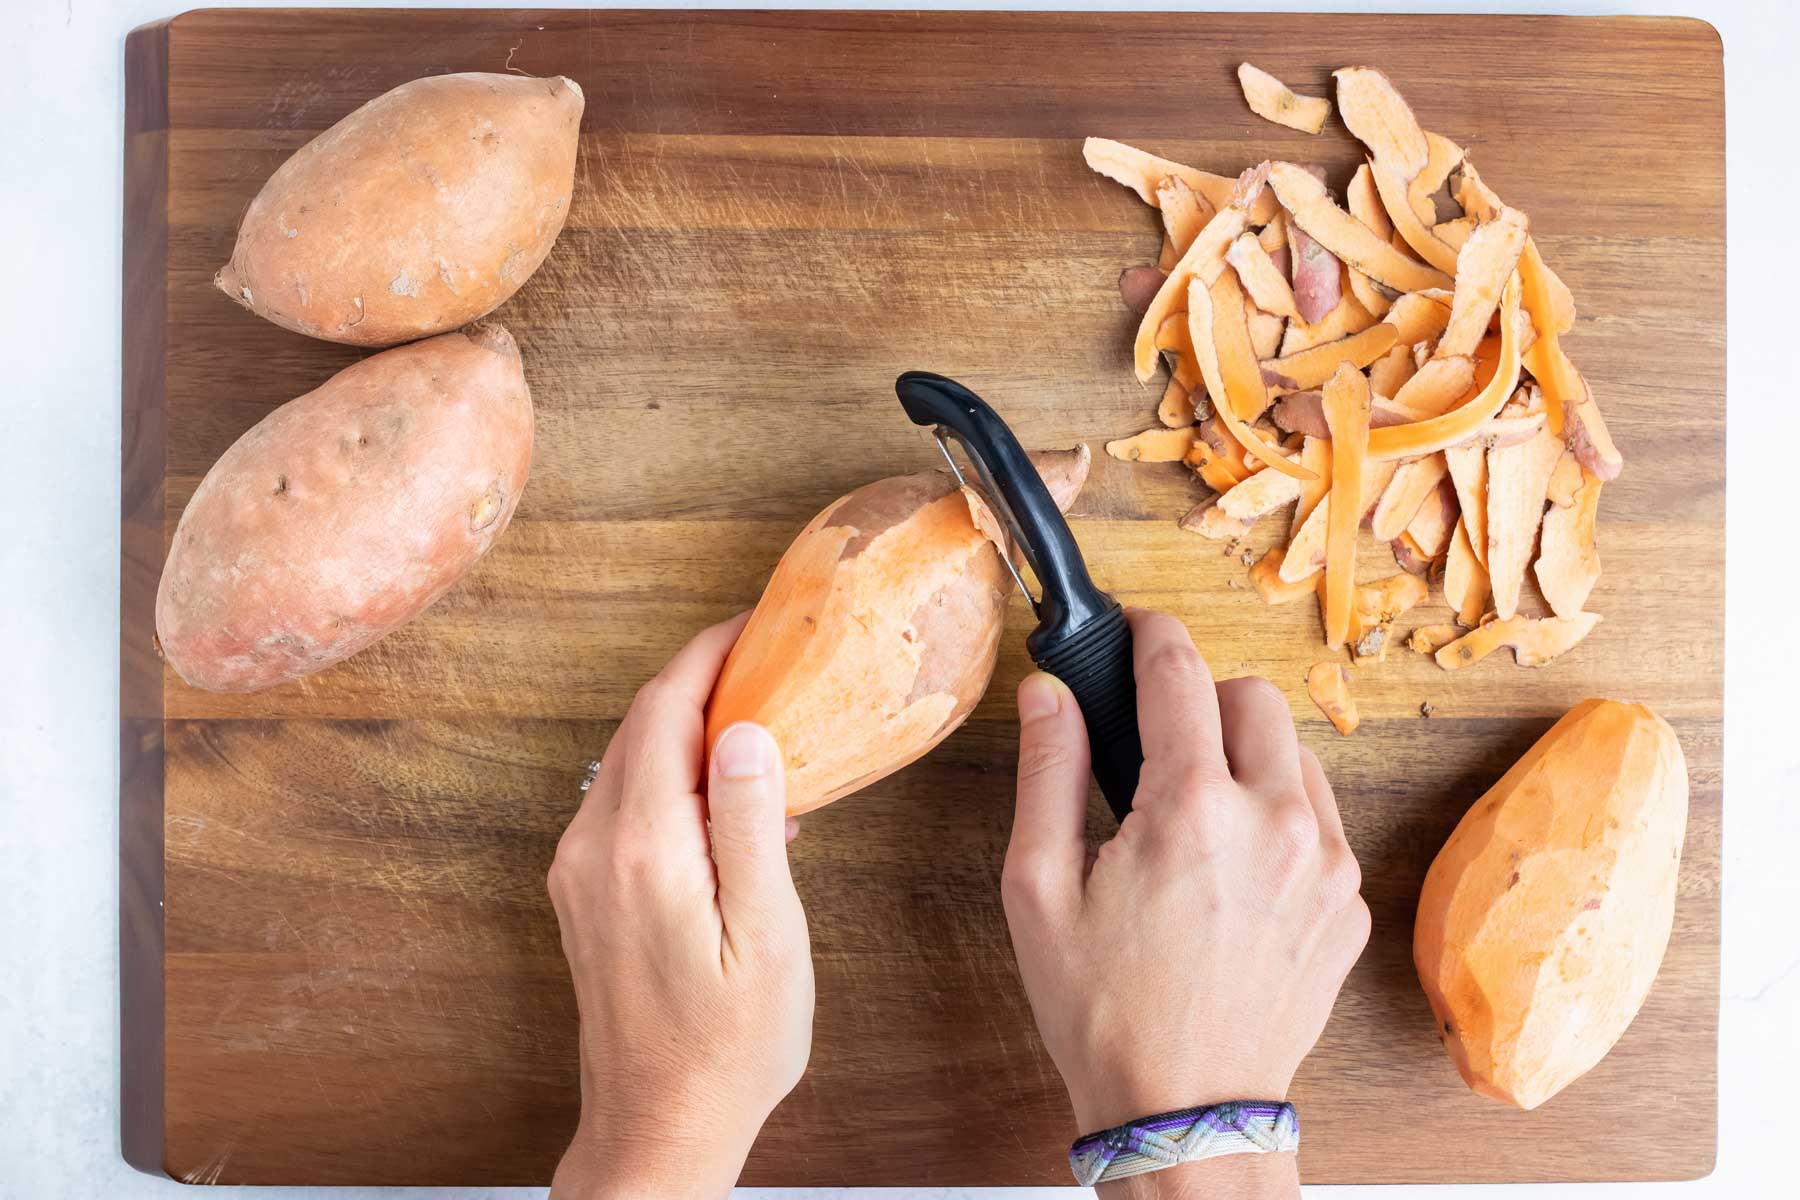 Sweet potatoes are peeled before being sliced.